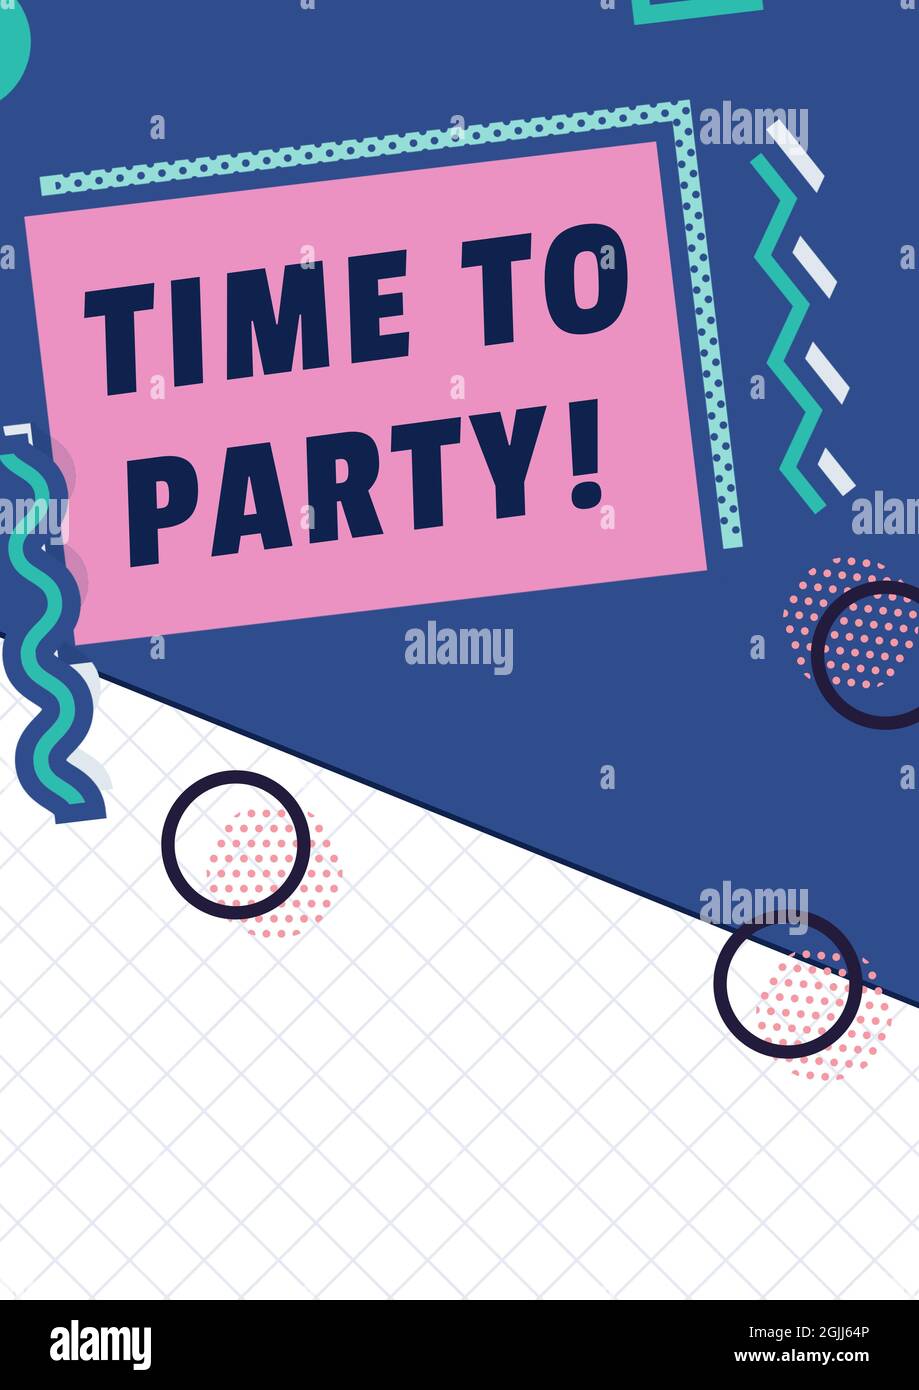 Composition of time to party text on pink rectangle, with line and circle patterns on blue and white Stock Photo